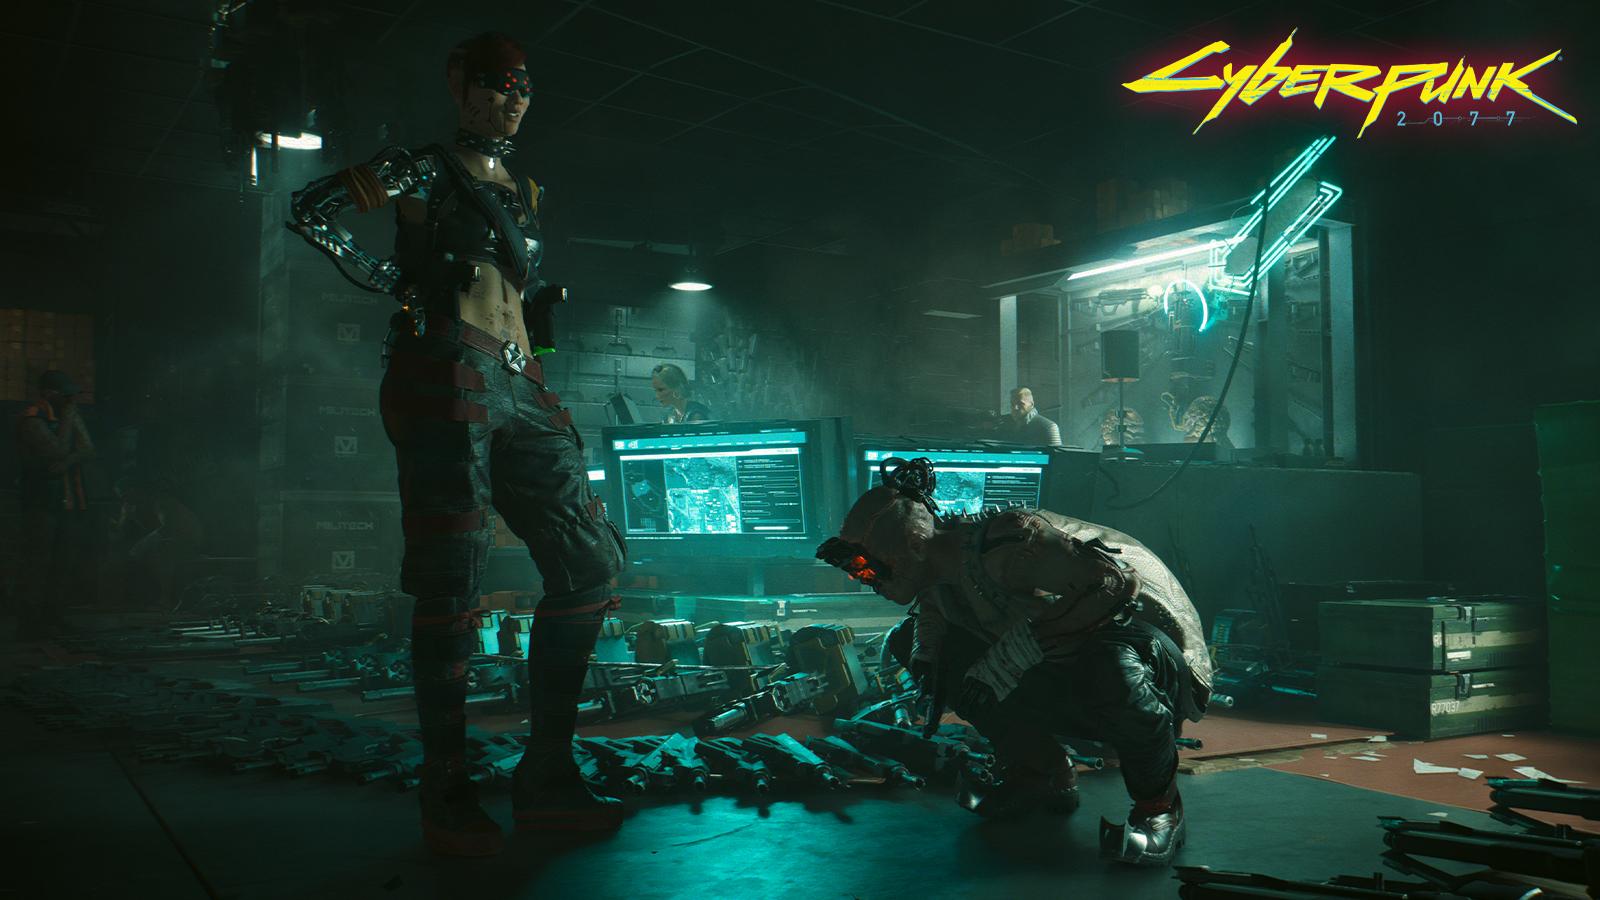 an image of two characters from Cyberpunk 2077